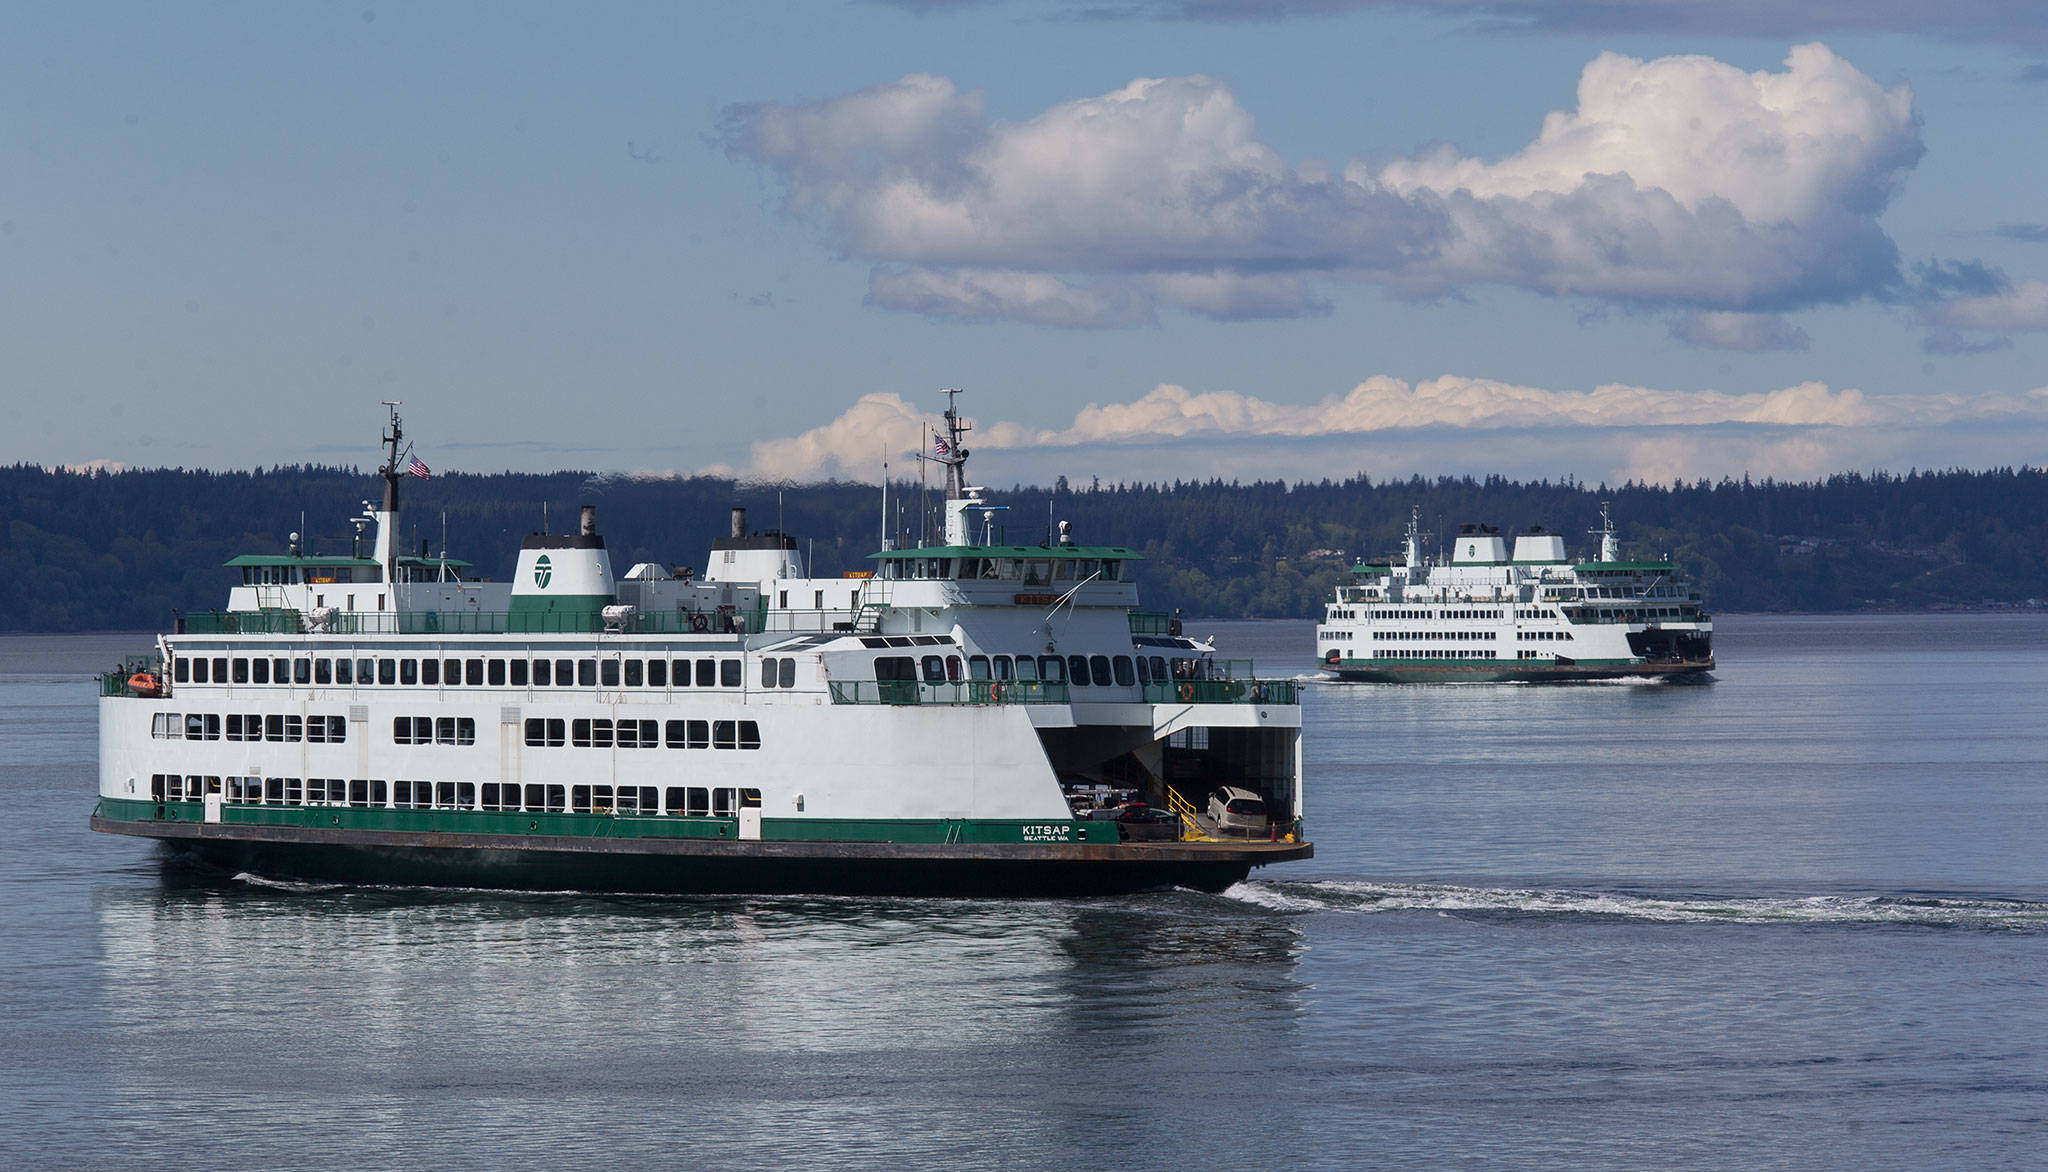 Andy Bronson/Everett Herald file photo
Ferries pass on a crossing between Mukilteo and Whidbey Island.